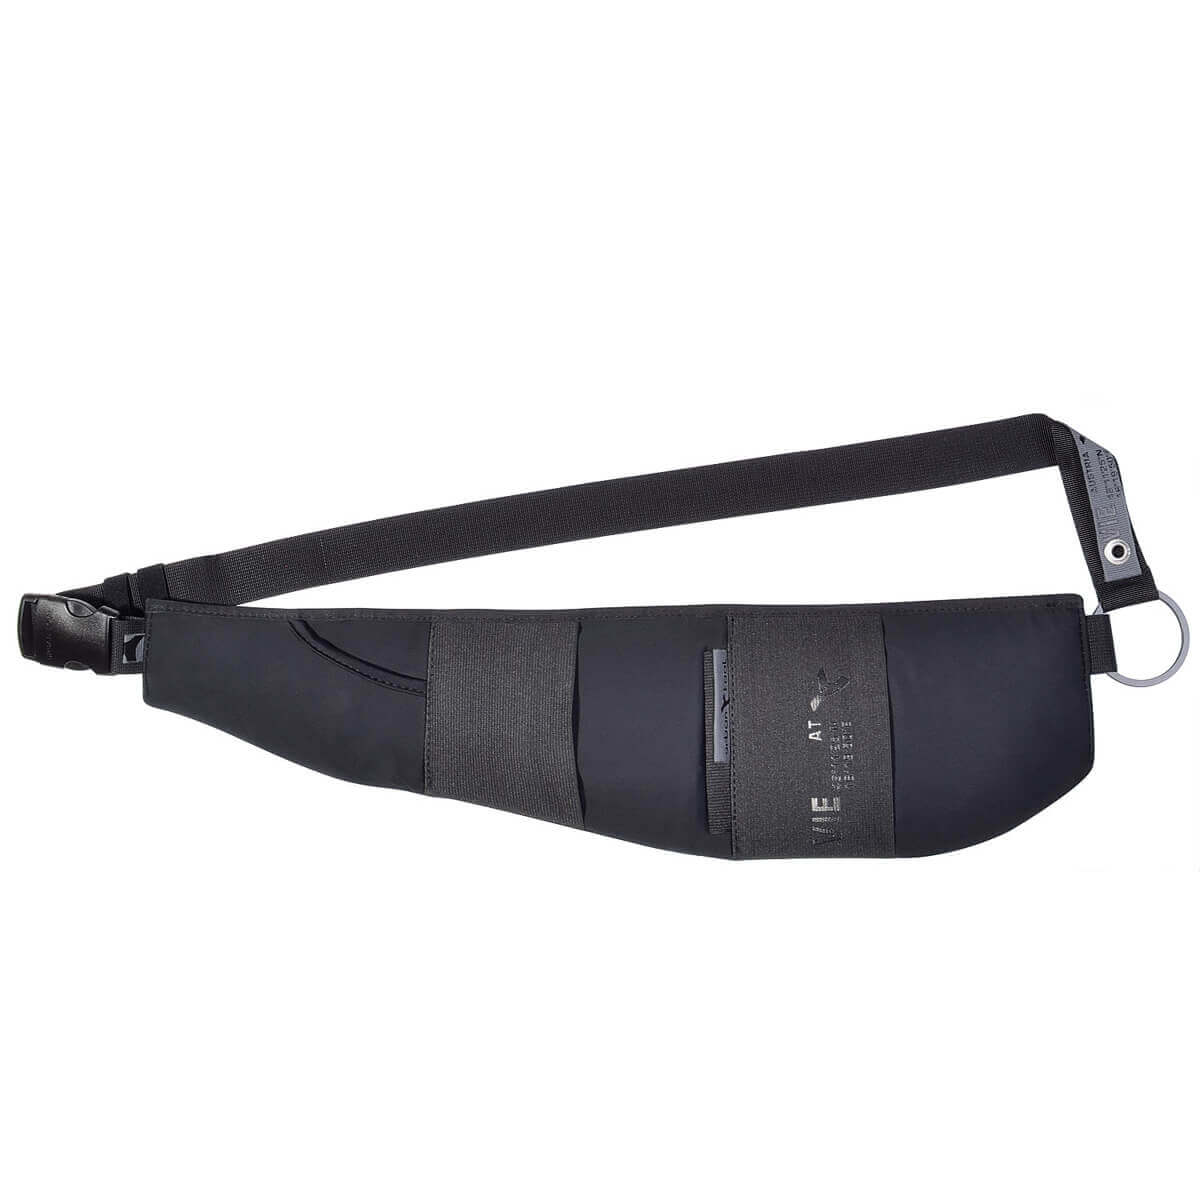 Carry bum bag for travel, sports and leisure, secure pockets, with key  retraction yo-yo - caseBelt